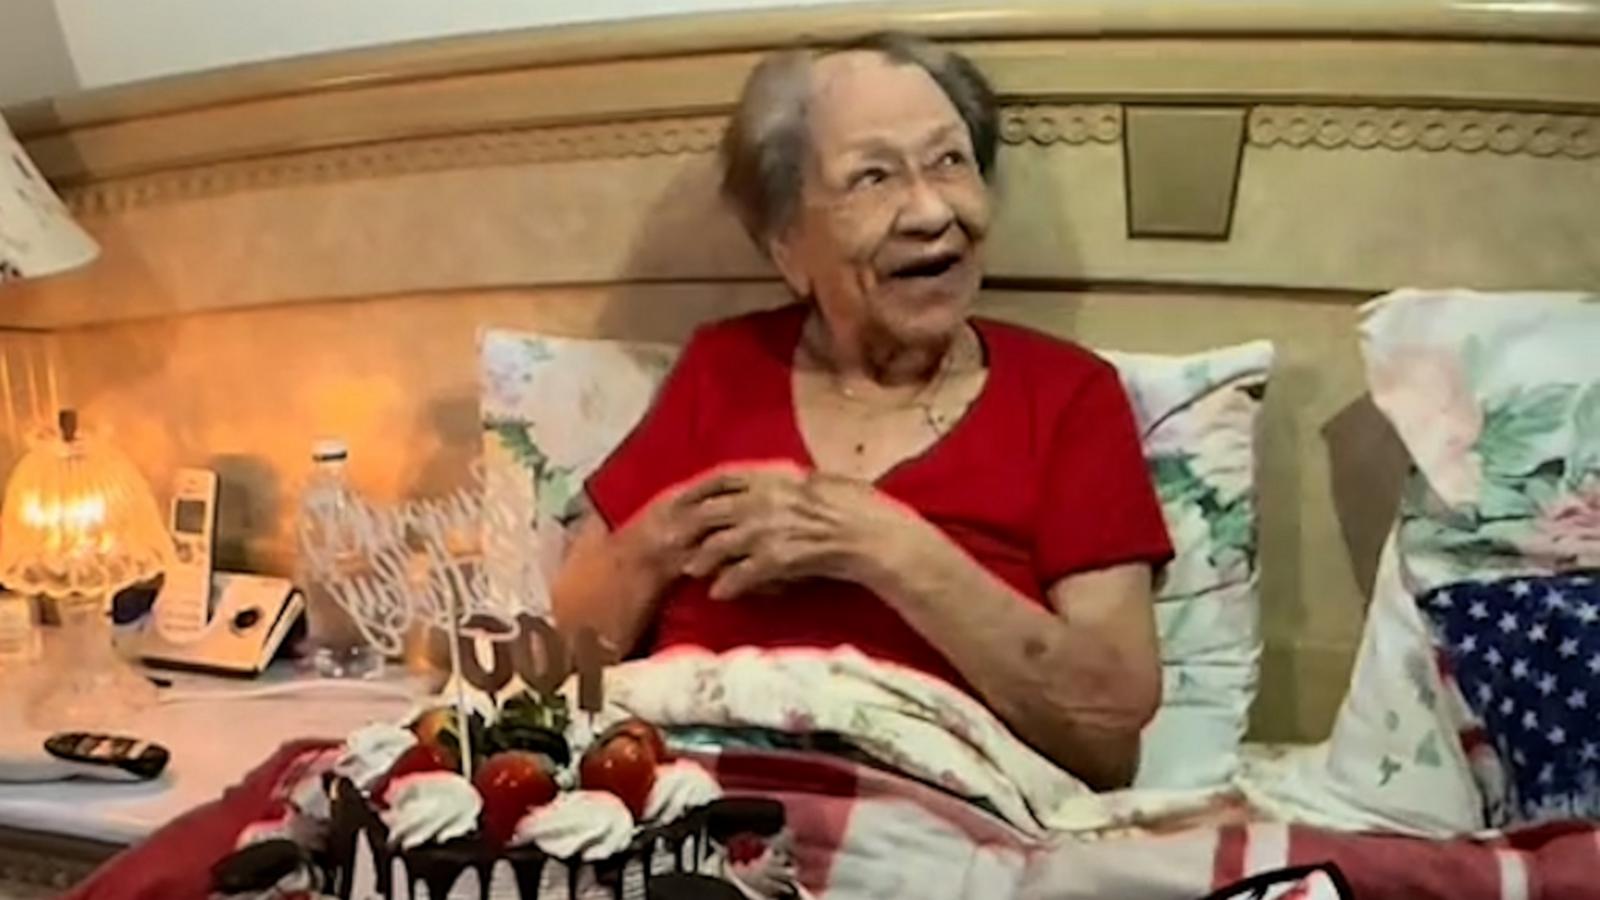 100-year-old woman in total disbelief realizing her age on her birthday -  Good Morning America